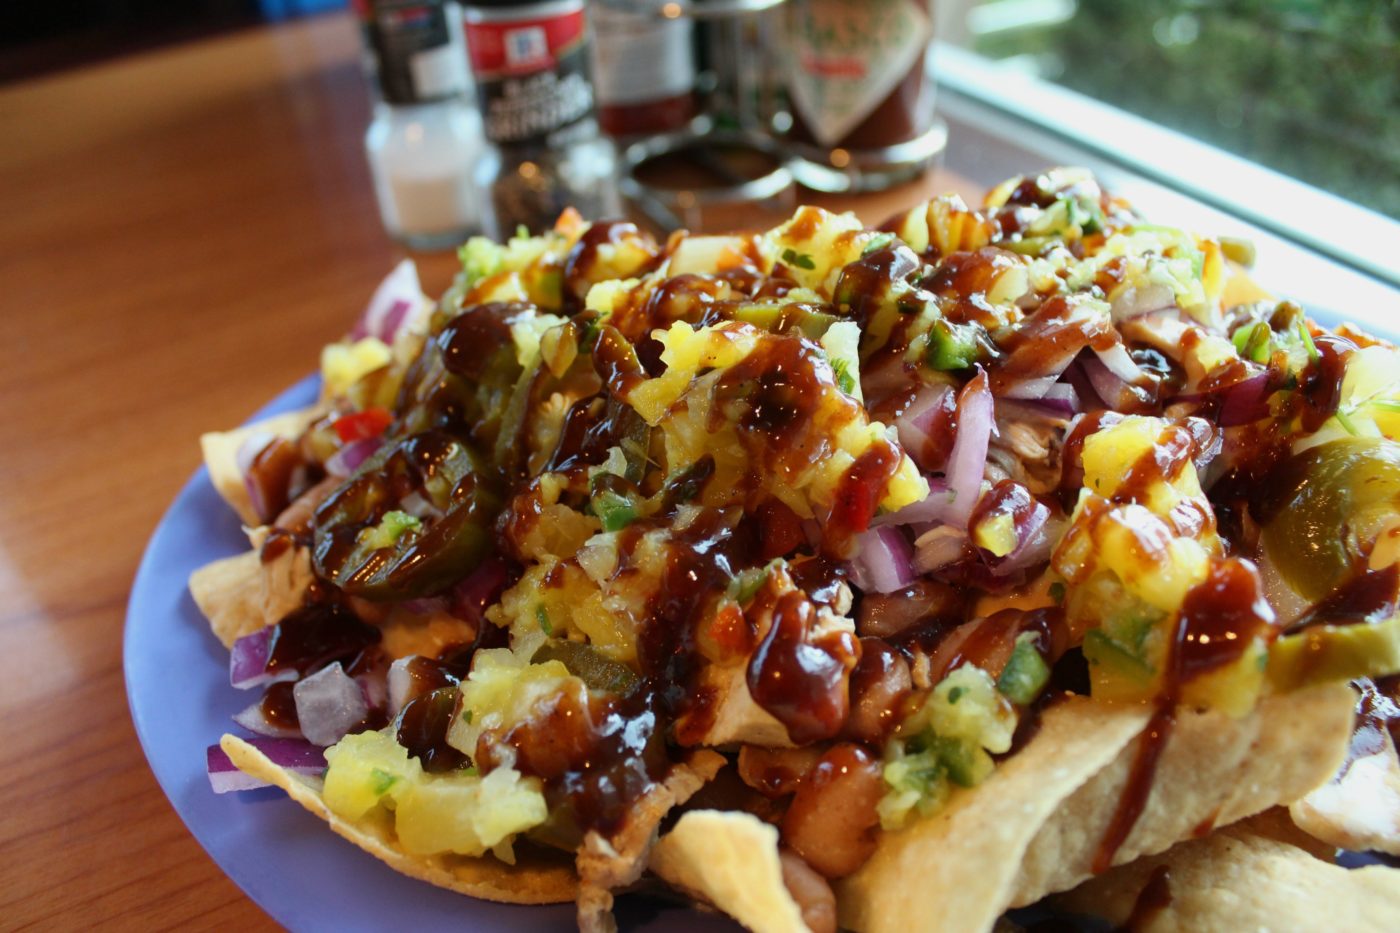 In my opinion, you can't ever go wrong with nachos. Especially ones from Mojo Burrito. The BBQ chicken ones are slathered in queso and BBQ sauce. They're mouthwatering.